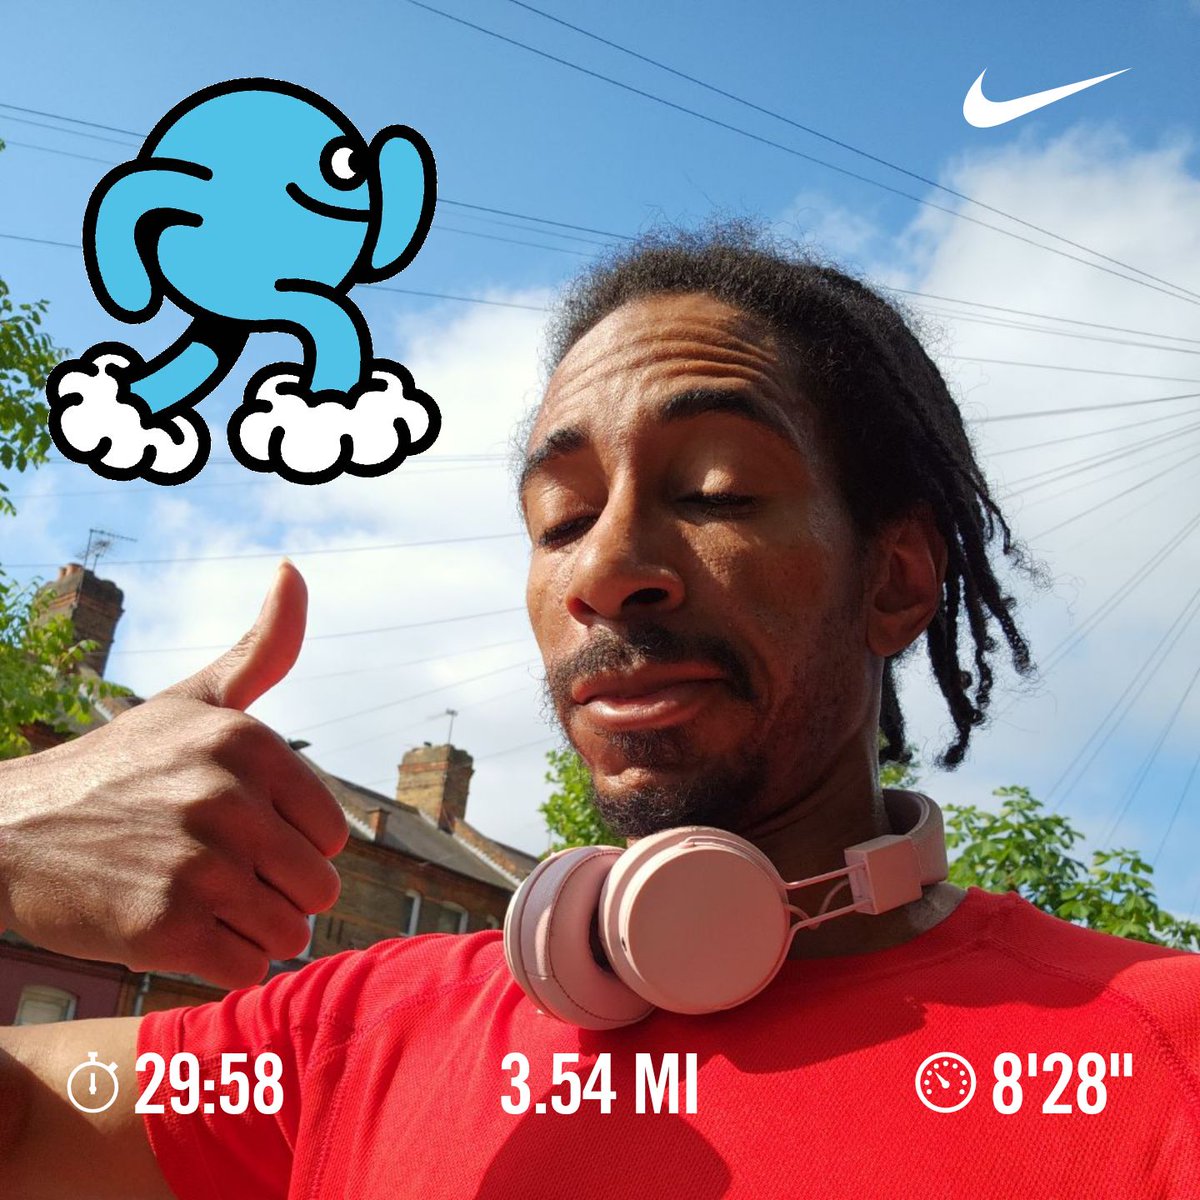 Once again because of my personal life. I couldn't do a Sunday Long run. But managed to fit in a cheeky 5k. It's been a long week. But everyone have a nice Sunday. #kylevstheworld #changetheworld #gottagofast #running #ukrunchat @UKRunChat